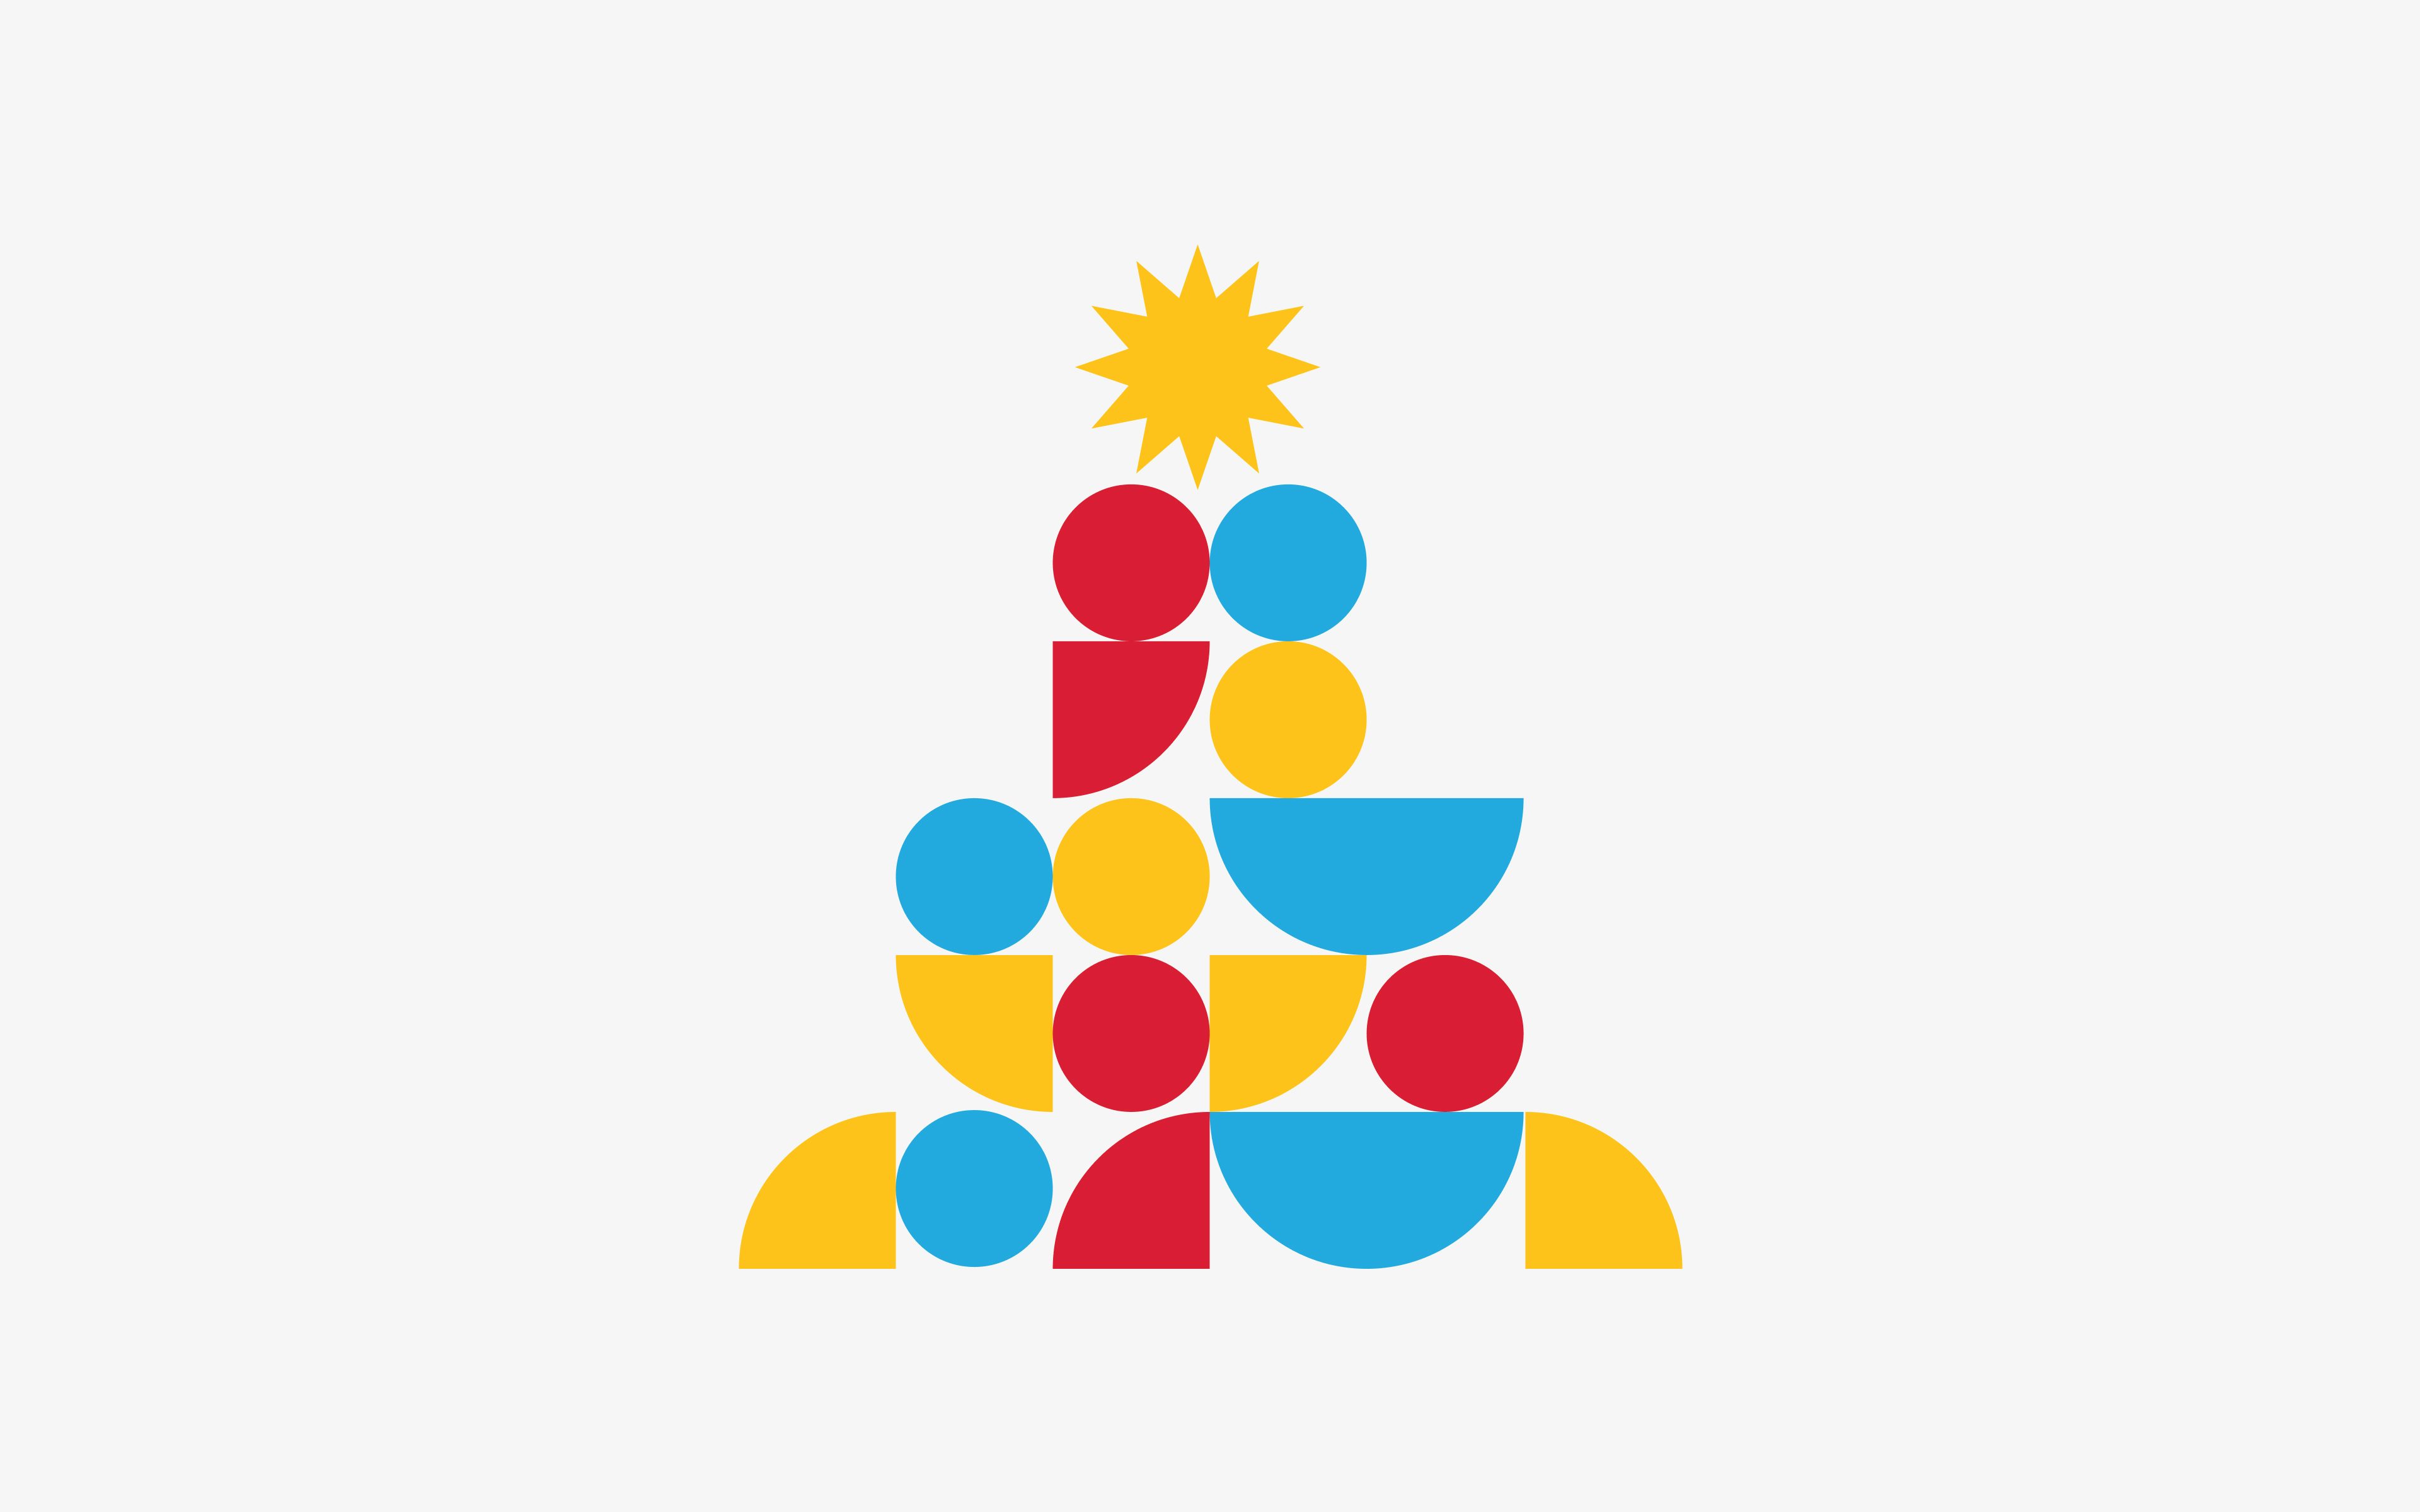 Christmas tree made up of colourful shapes